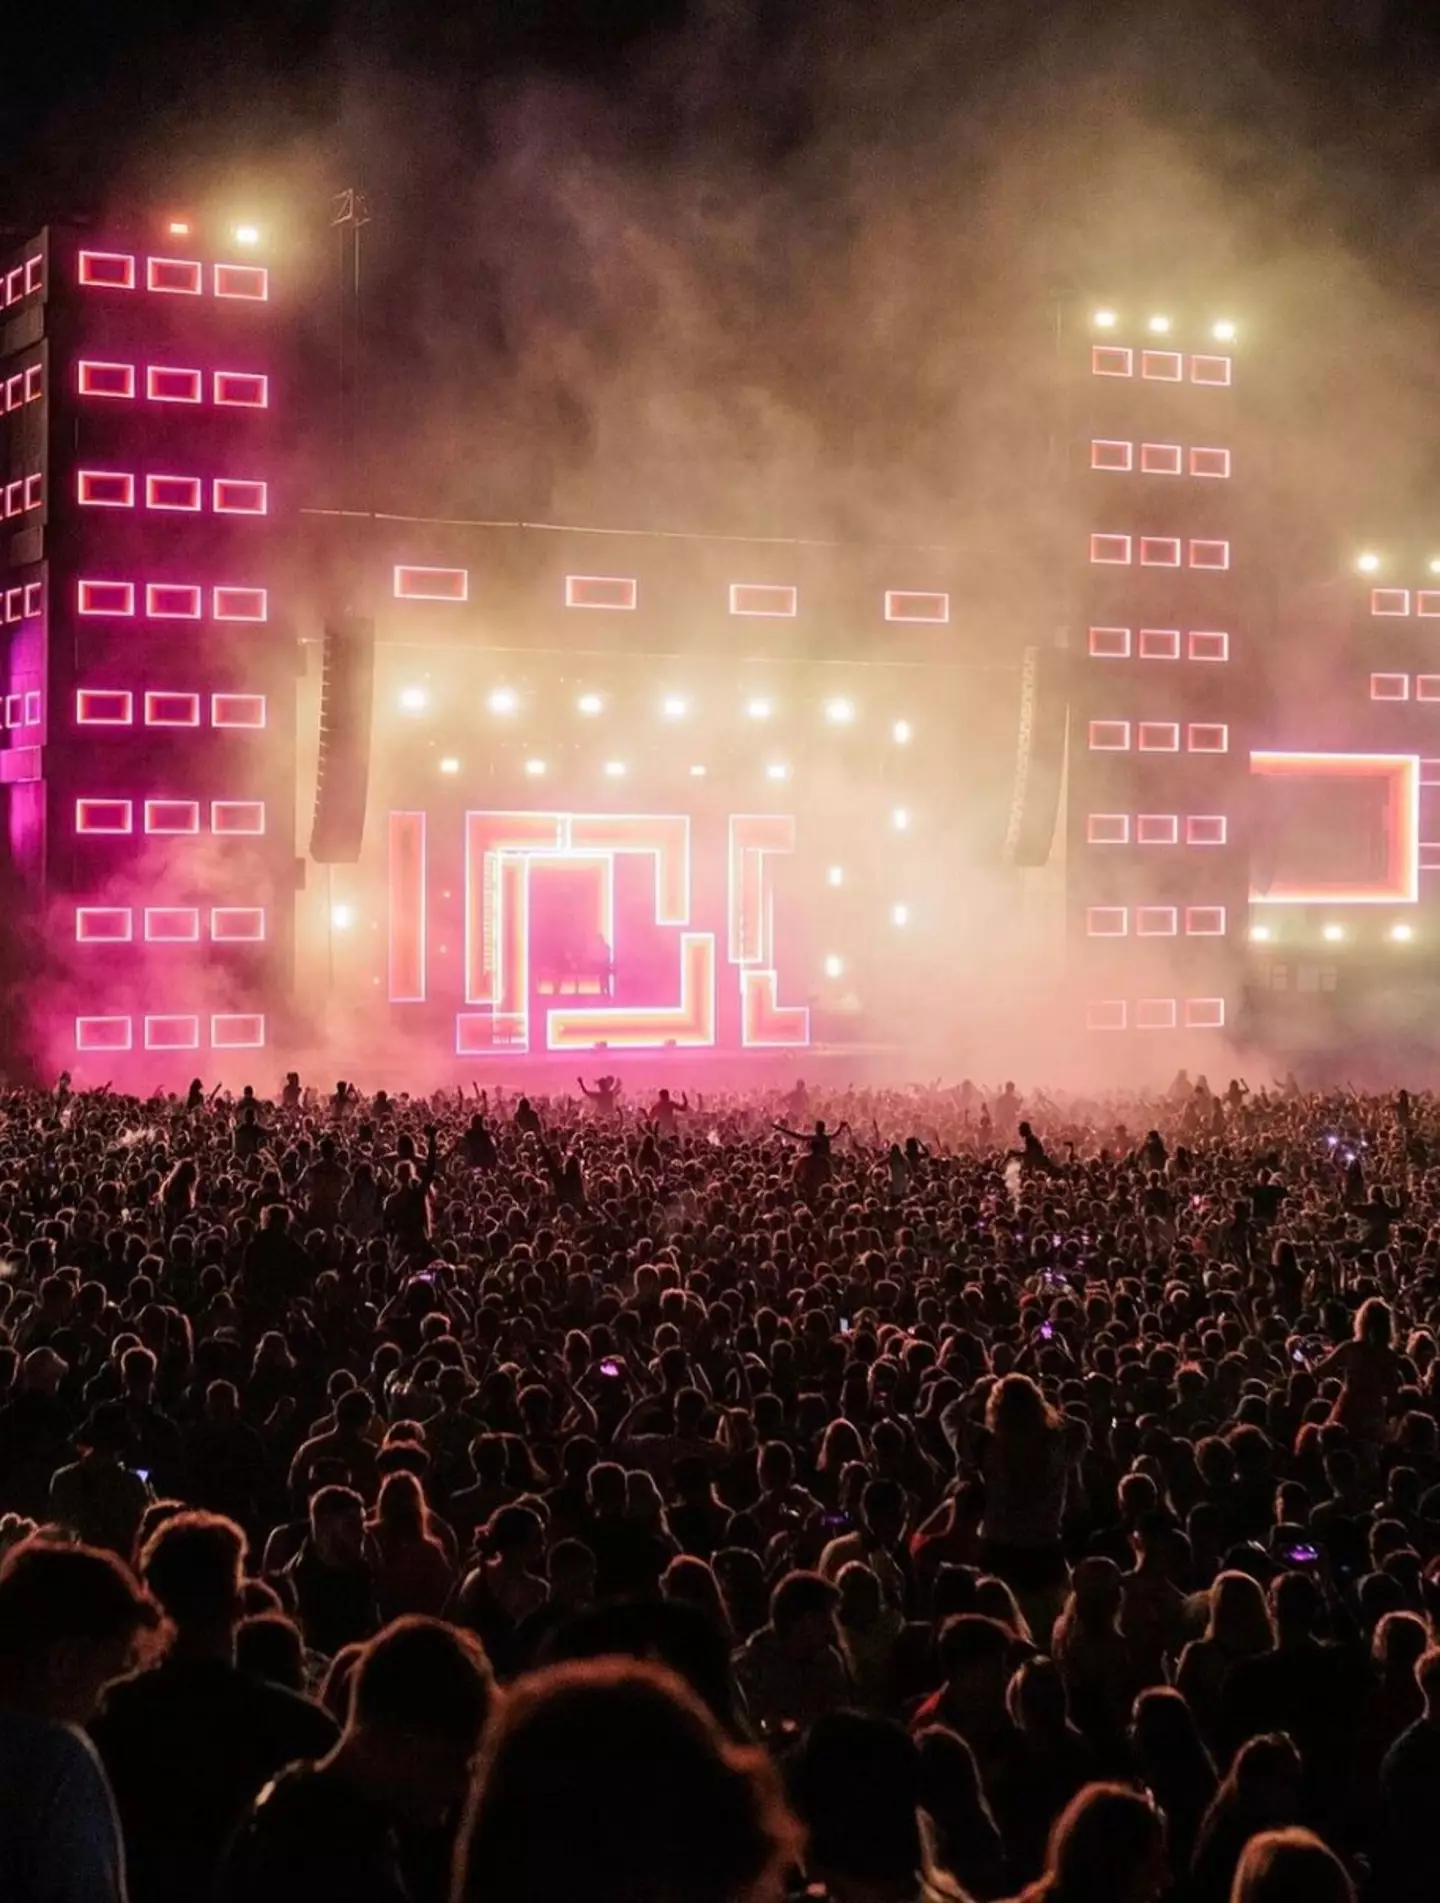 A crowd of 80,000 people gathered at Parklife festival this year.